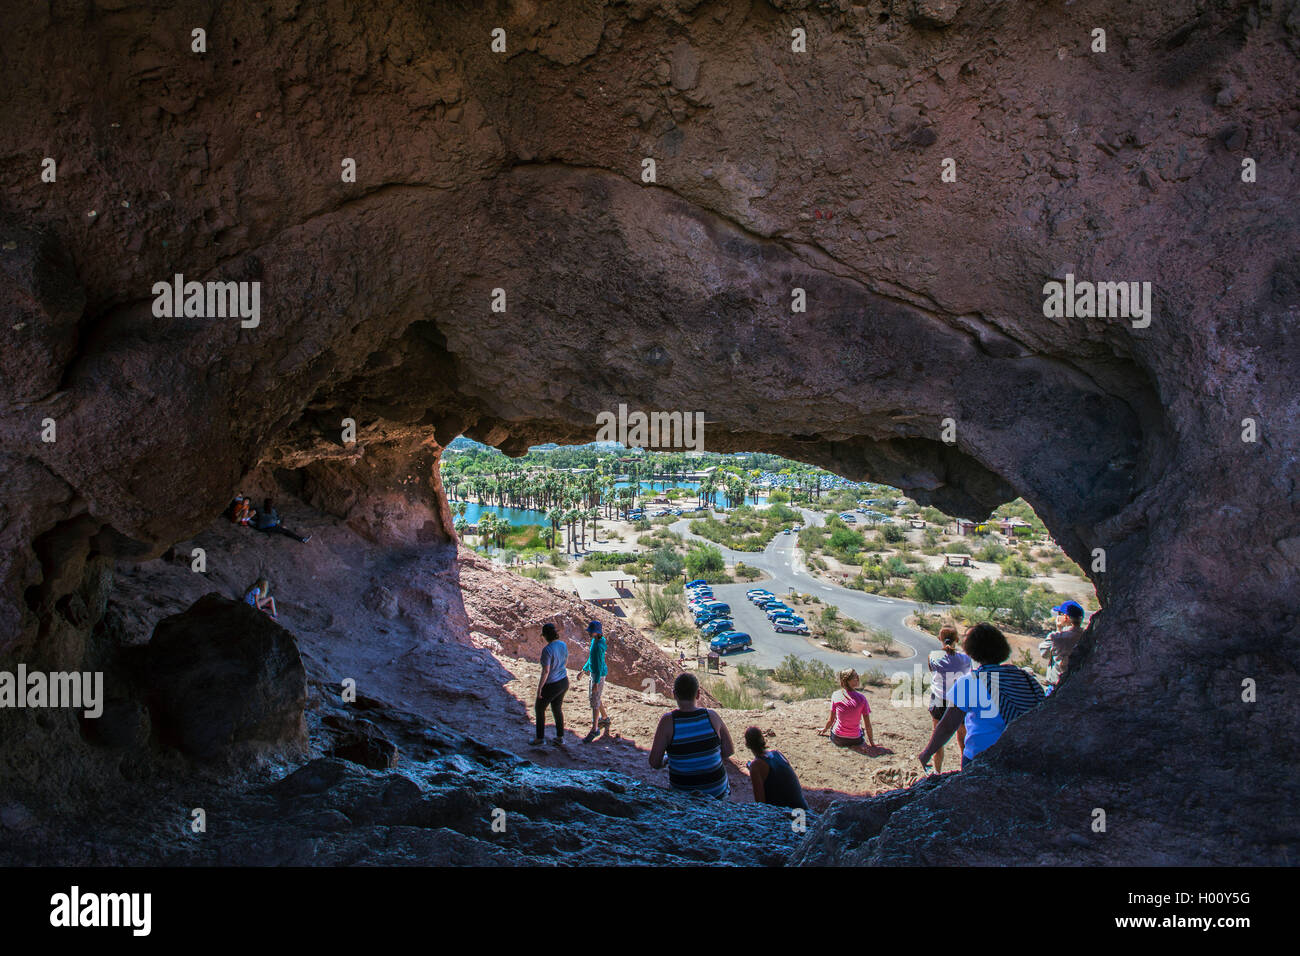 Hole-in-the-Rock, cave in red sandstone, view through the cave in the park, USA, Arizona, Papago Park, Phoenix Stock Photo